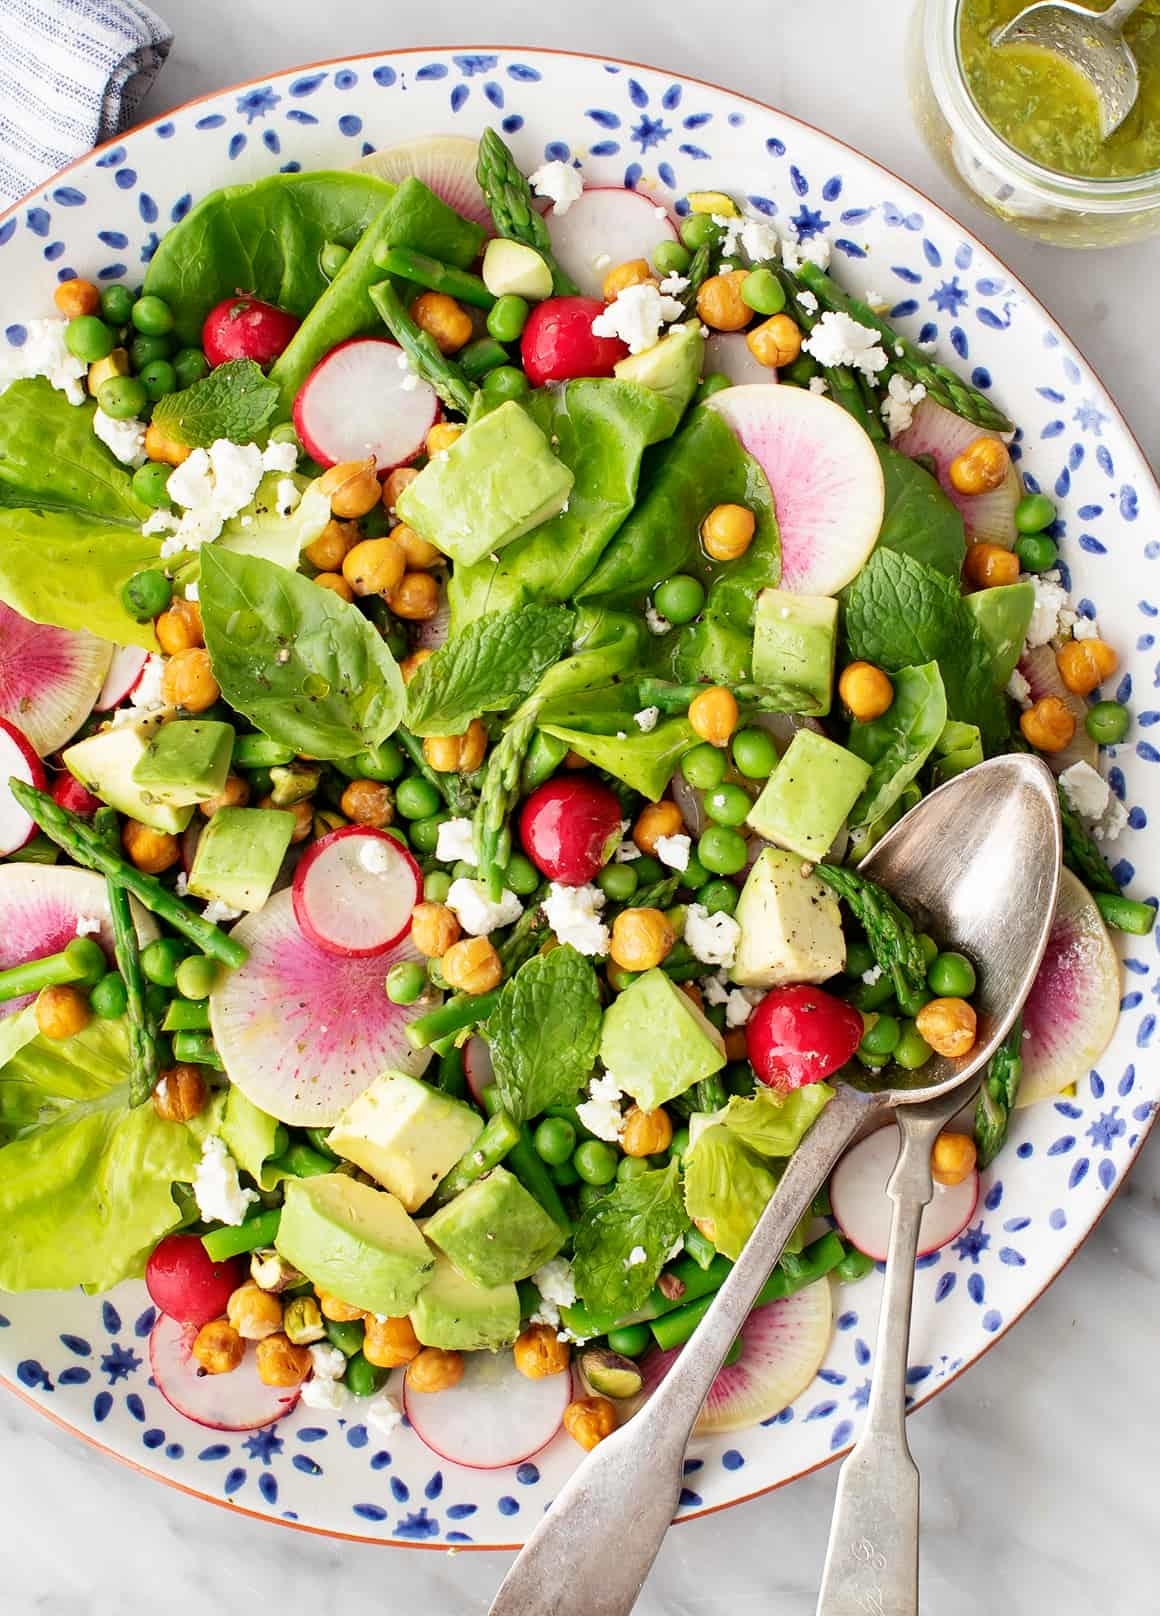 A fresh salad with lettuce, chickpeas, avocado, radishes, peas, and cheese, served with dressing and utensils on the side